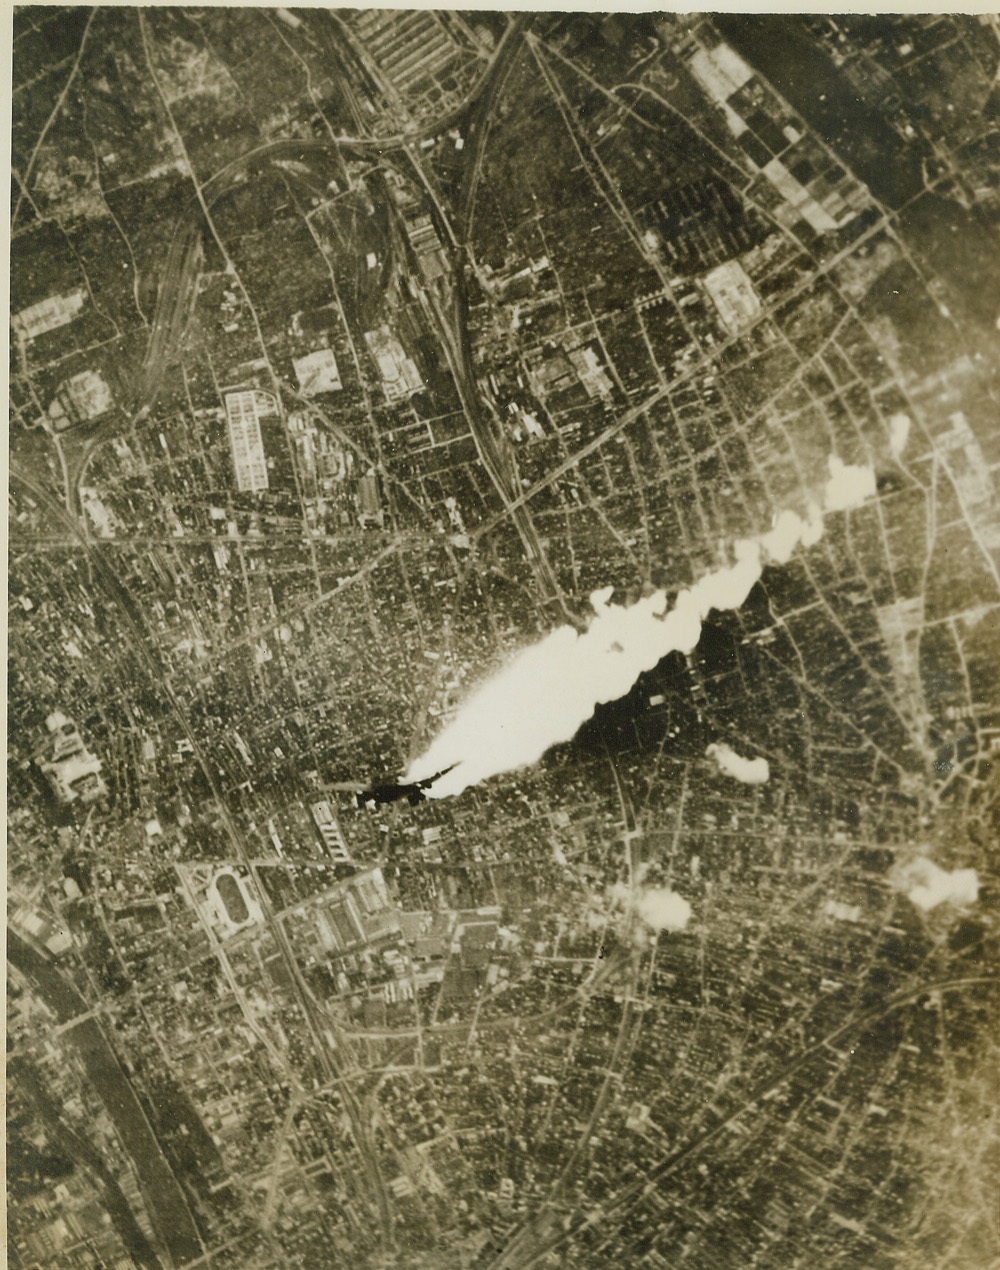 Death Dive of a Fortress, 3/6/1944. With a 400-foot streamer of white-hot flame trailing from its right wing, an American Flying Fortress hit by German flak over Paris, dives to its doom in the streets of the city below. Credit: (U.S. Army Air Forces Photo from ACME);